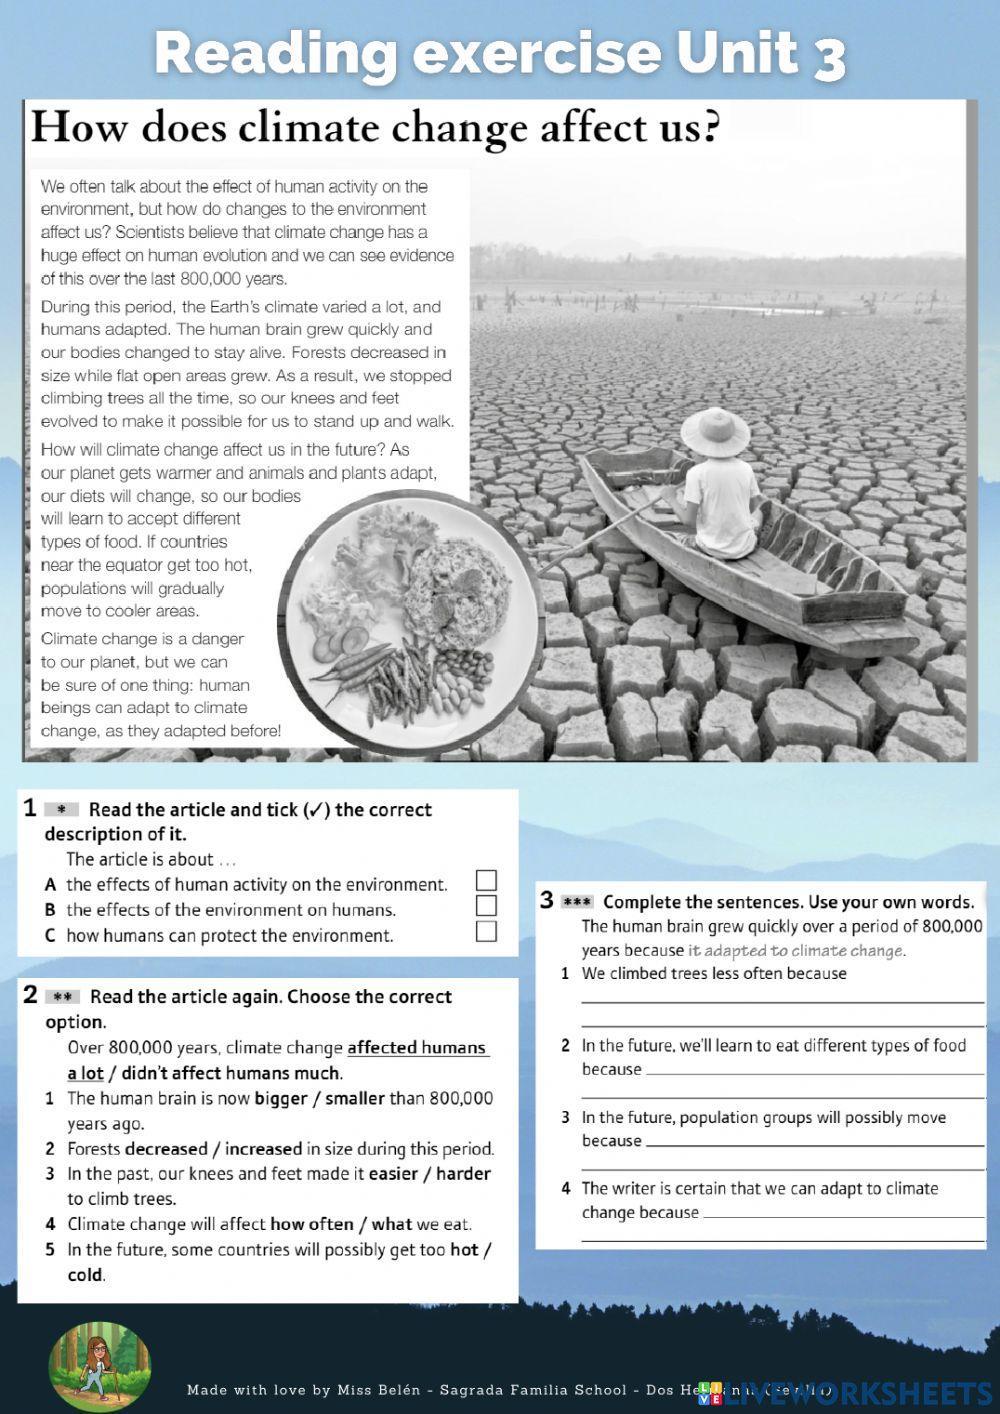 Reading exercise - How does climate change affect us?